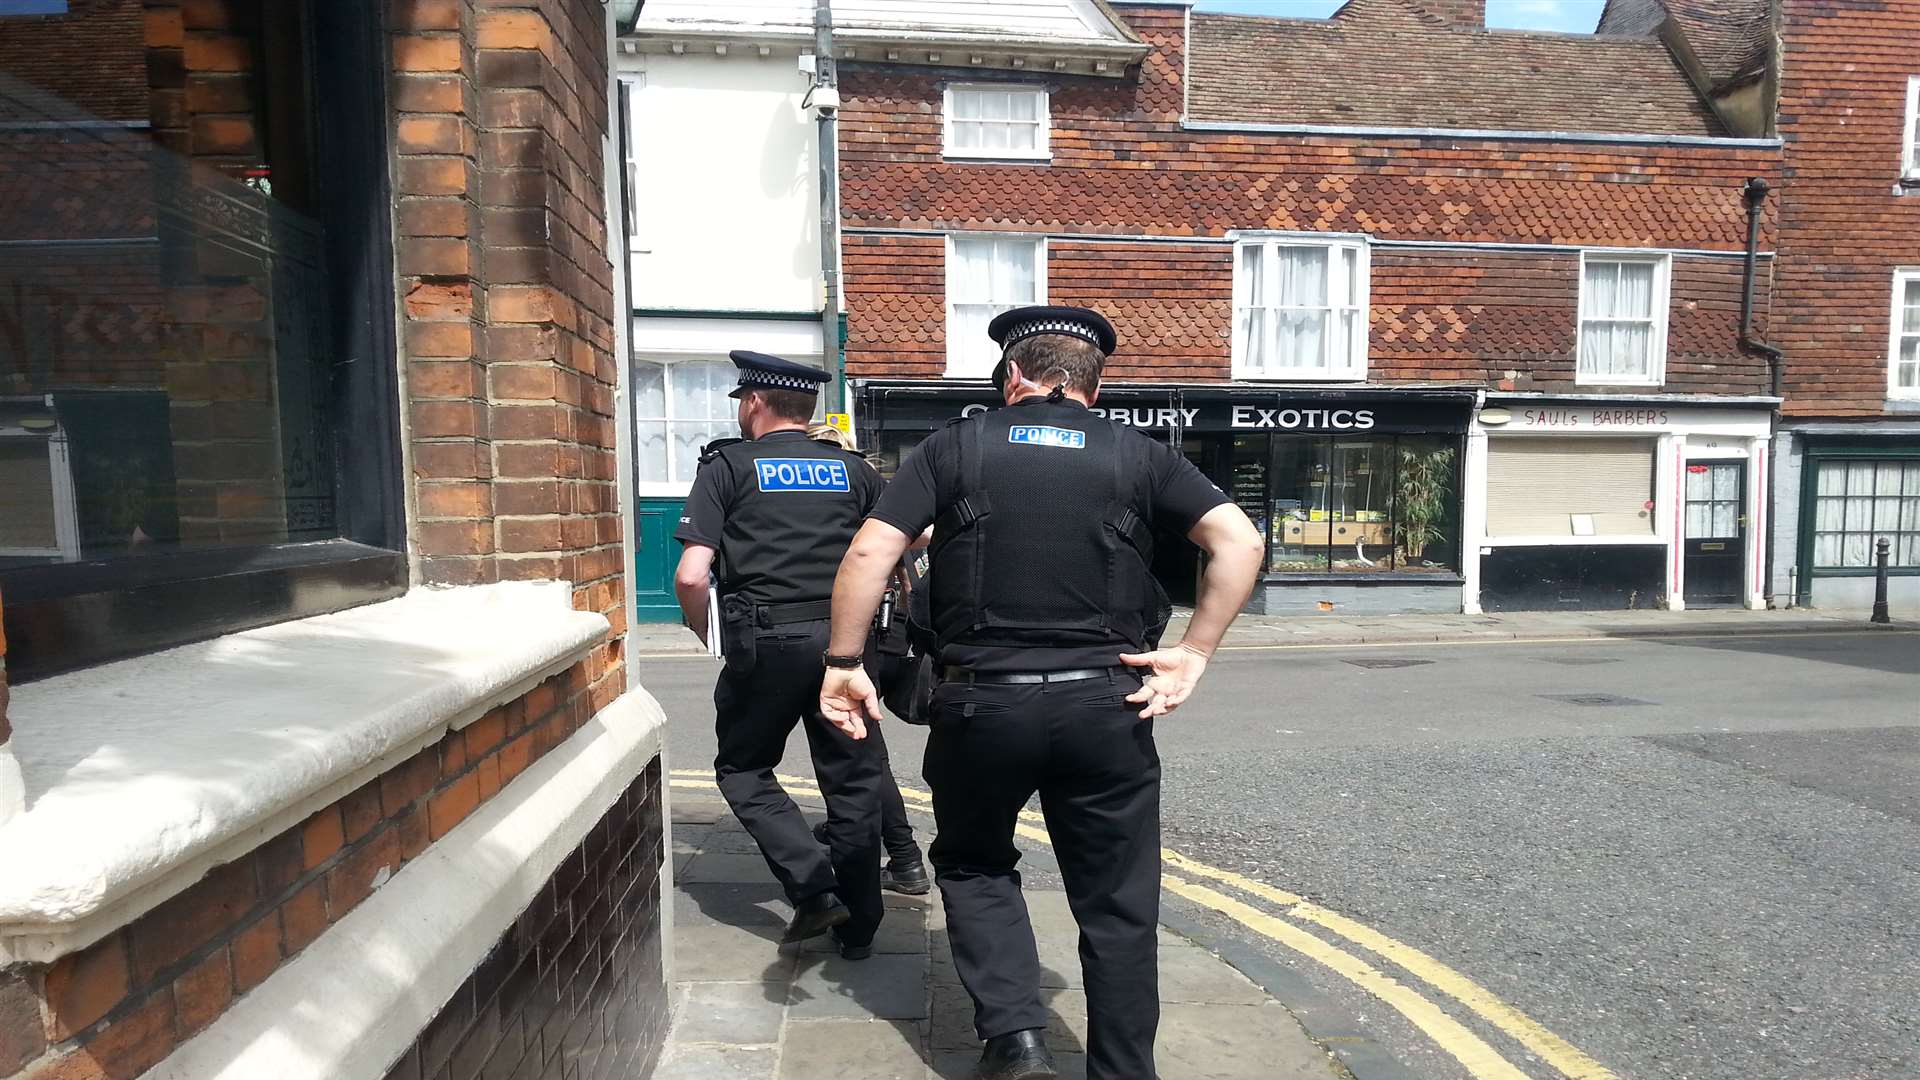 Police on the way to a raid in Canterbury